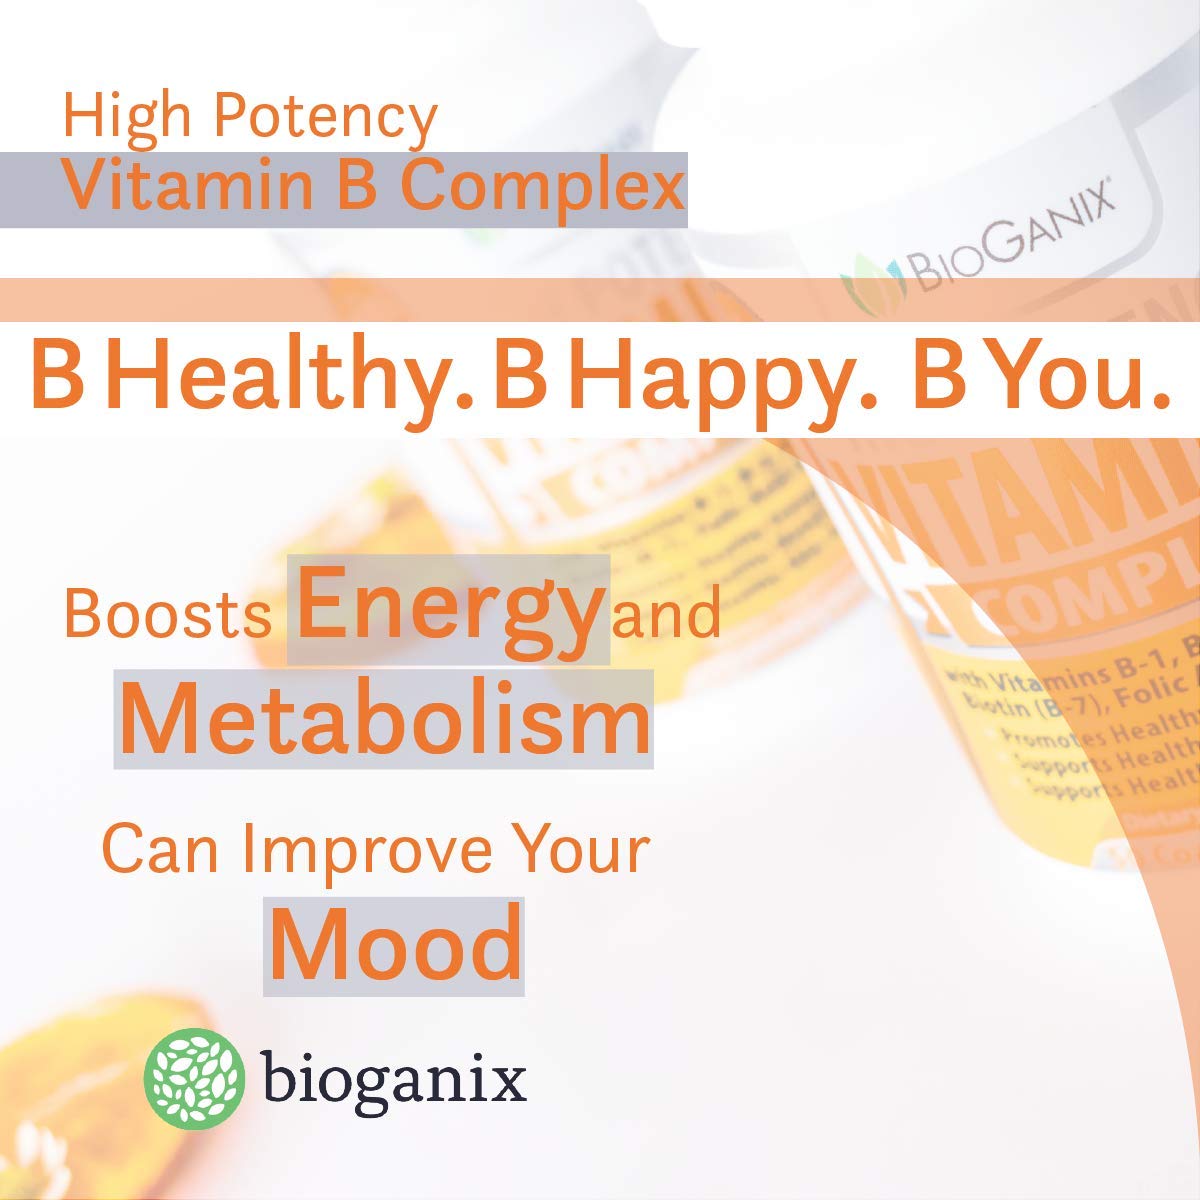 Vitamin B Complex Supplement Made in the USA | With Vitamin B12, B1, B2, B3, B5, B6, B7 Biotin & B9 Folic Acid | Vegan, non-GMO High Potency Capsules To Boost Energy, Metabolism, Skin, Hair & Eyes - $25.95